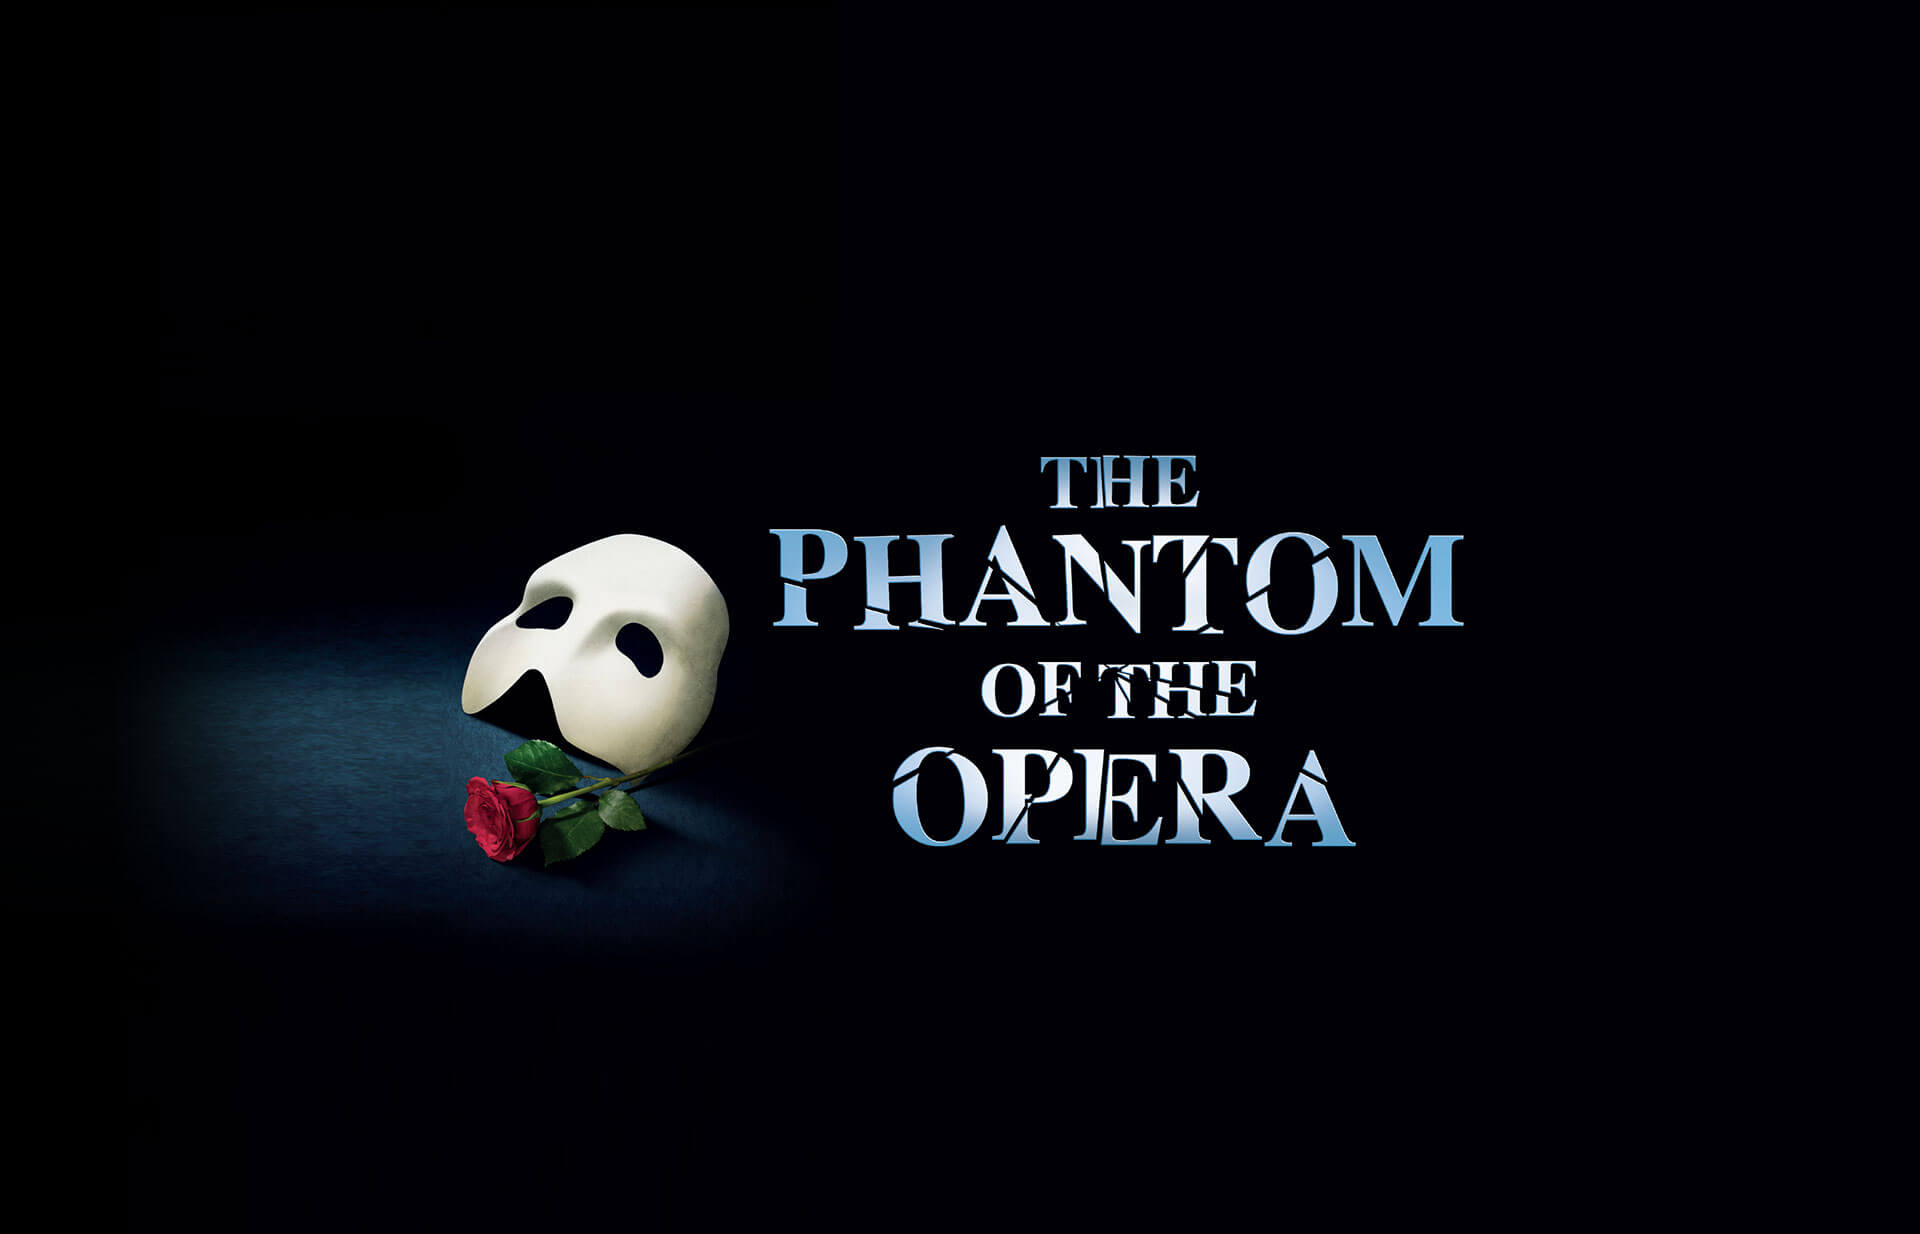 Phantom of the Opera, renowned musical at the Sands Theatre in 2019